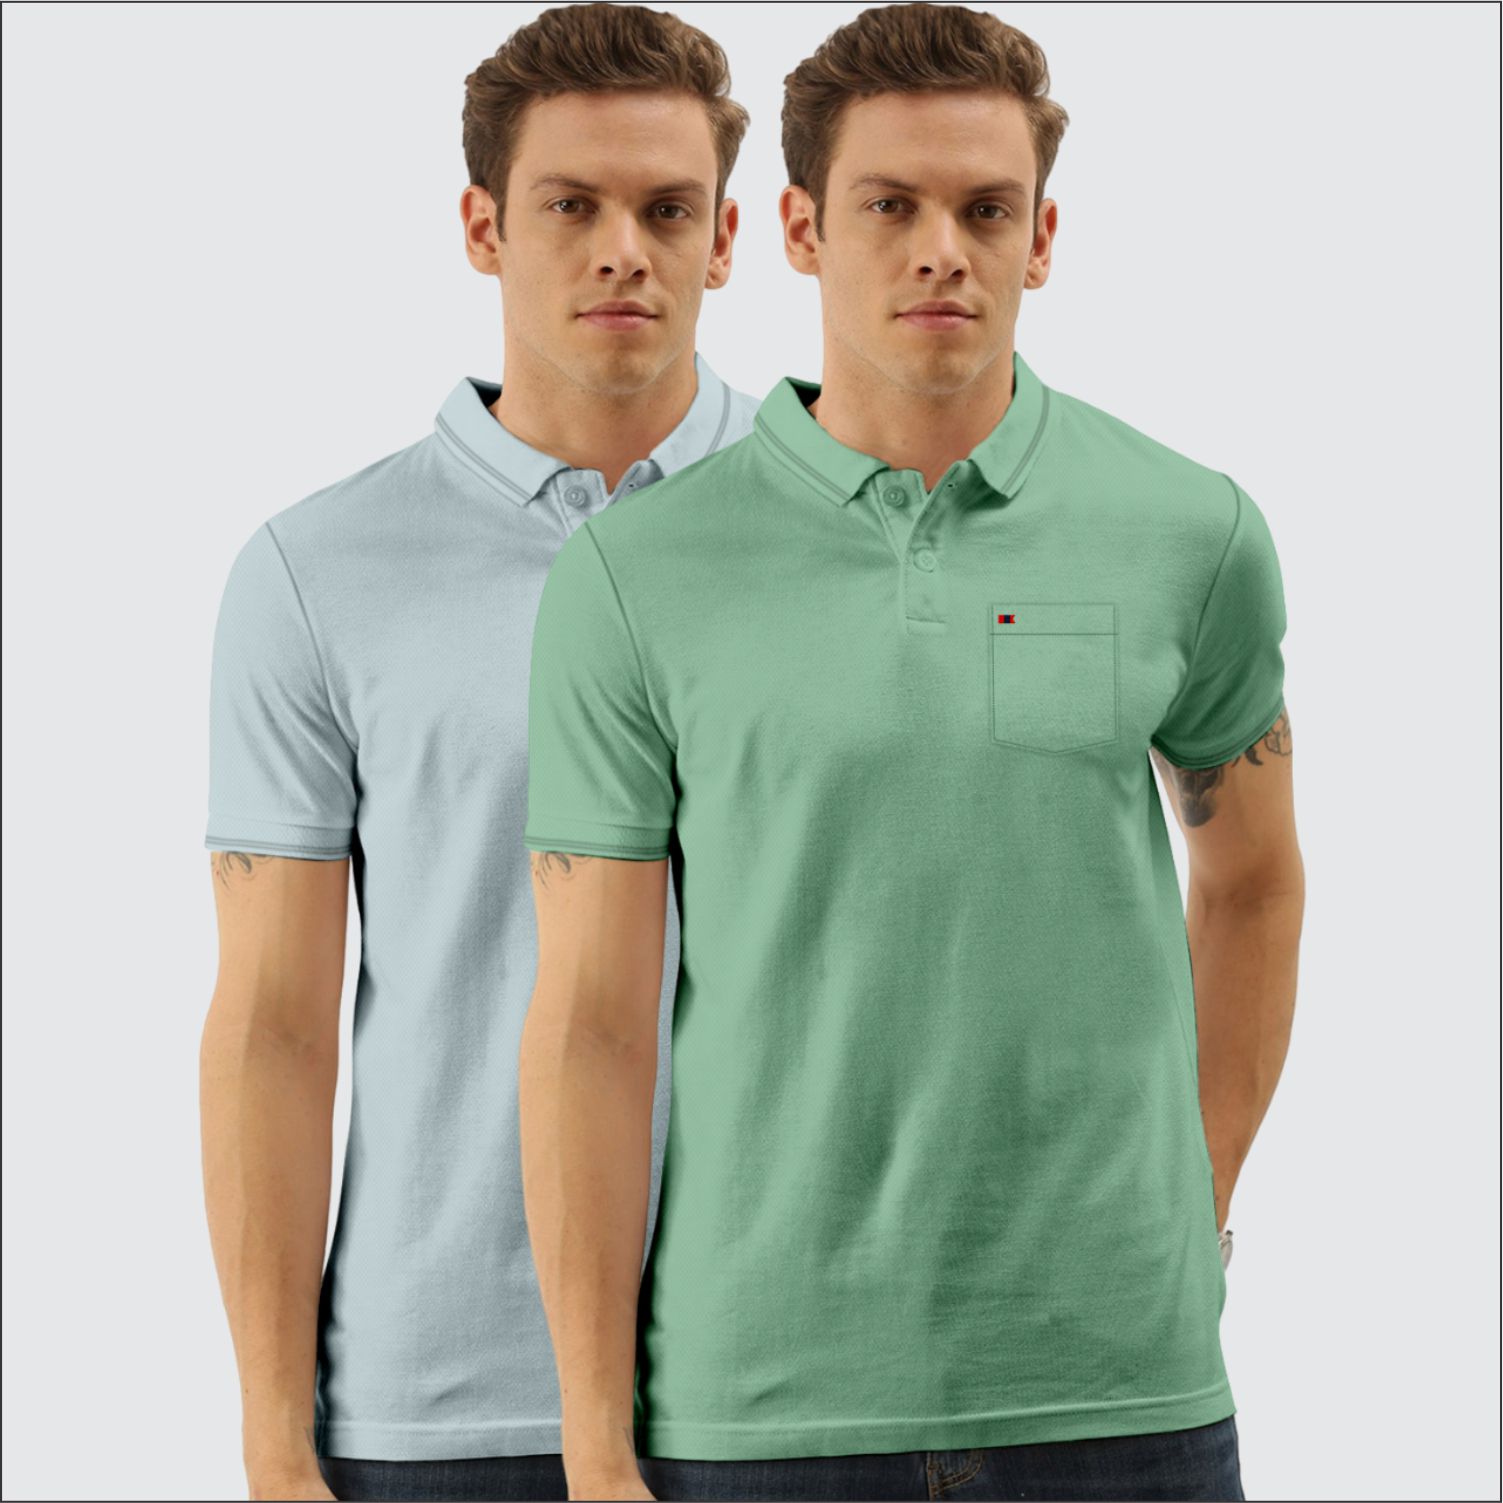     			TAB91 Cotton Blend Slim Fit Solid Half Sleeves Men's Polo T Shirt - Khaki ( Pack of 2 )